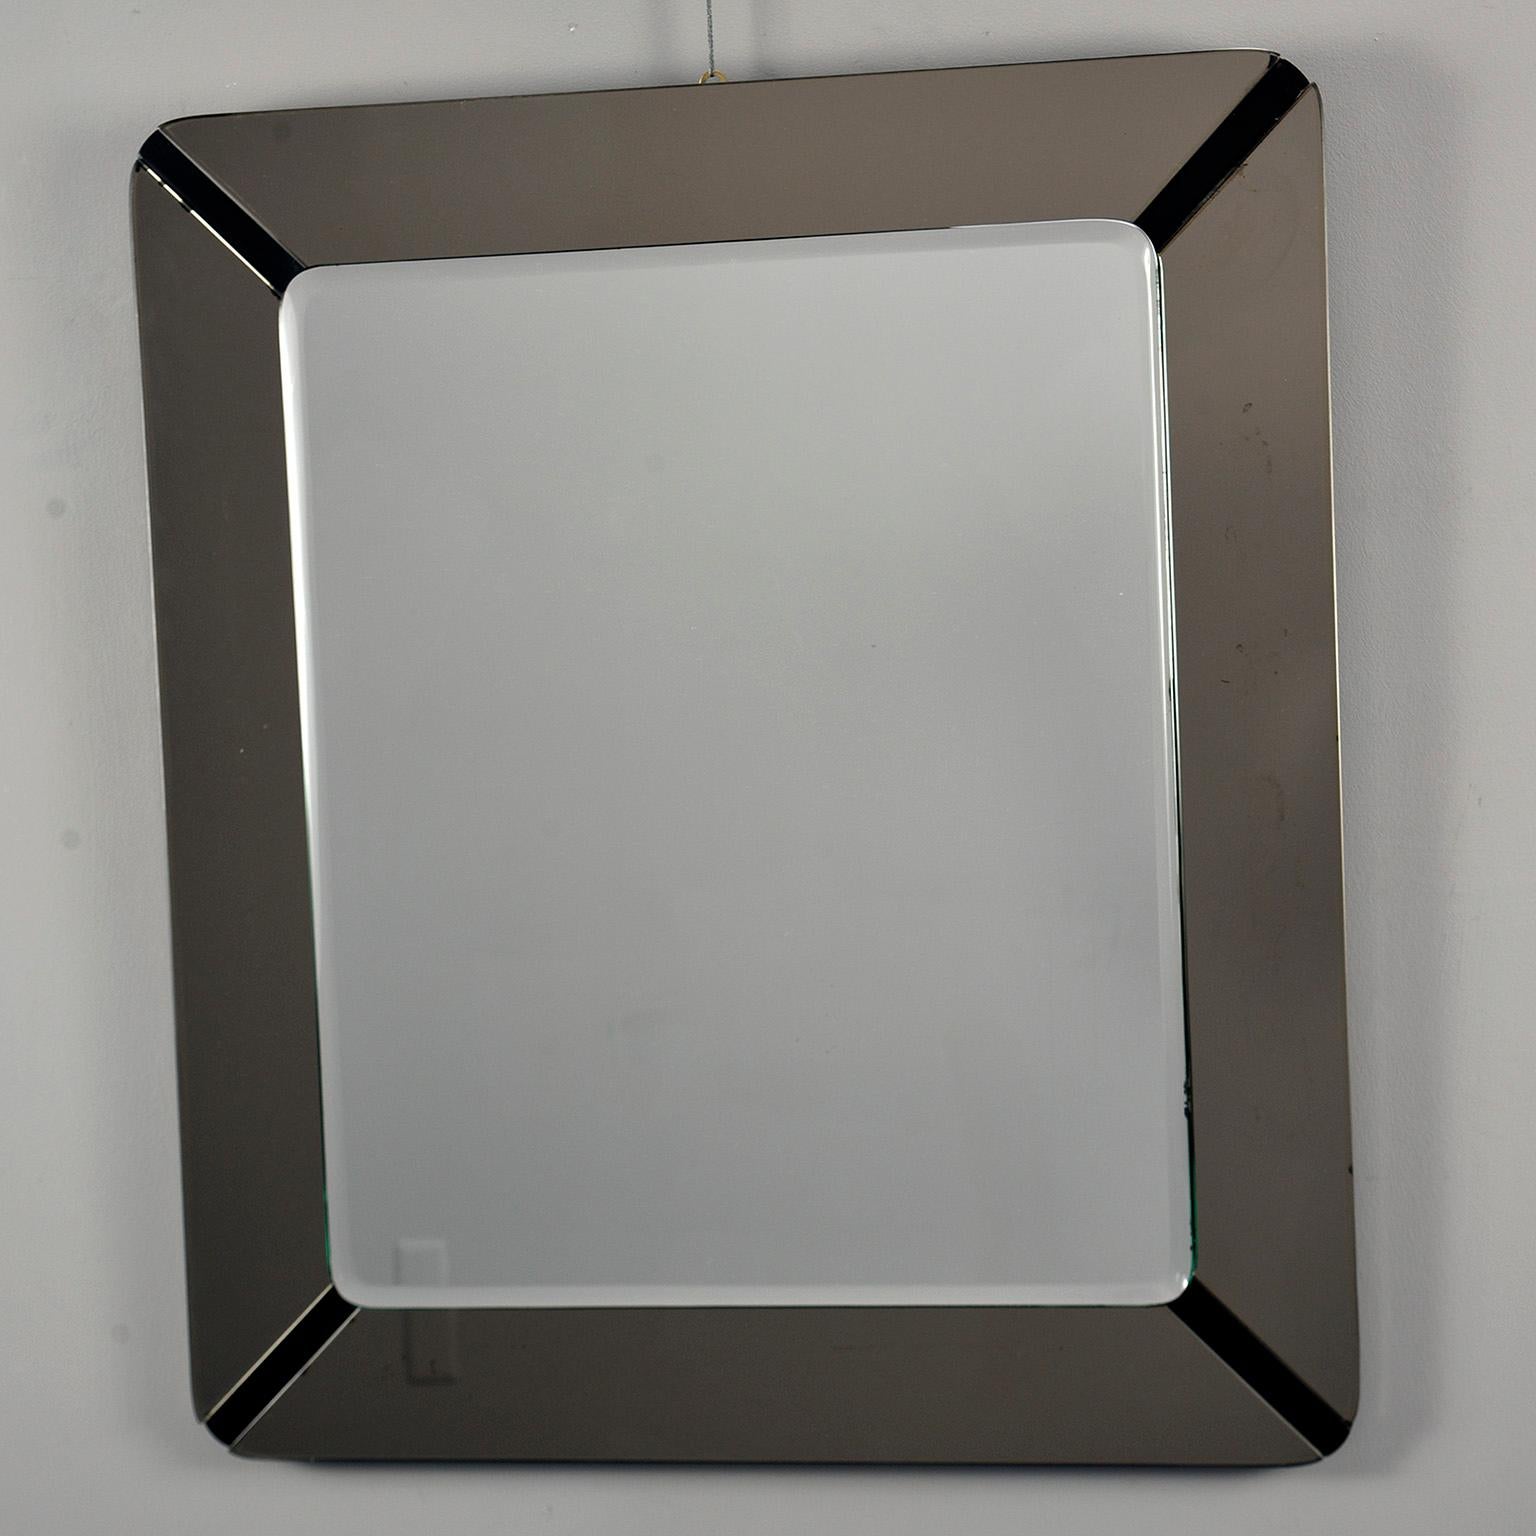 Square mirror with smoke-colored glass frame attributed to Italian maker crystal arte, circa 1970s. Very good vintage condition with some minor loss of silvering to mirror at edges. See detail photos.

Actual mirror size: 23.5” H x 19.75” W.